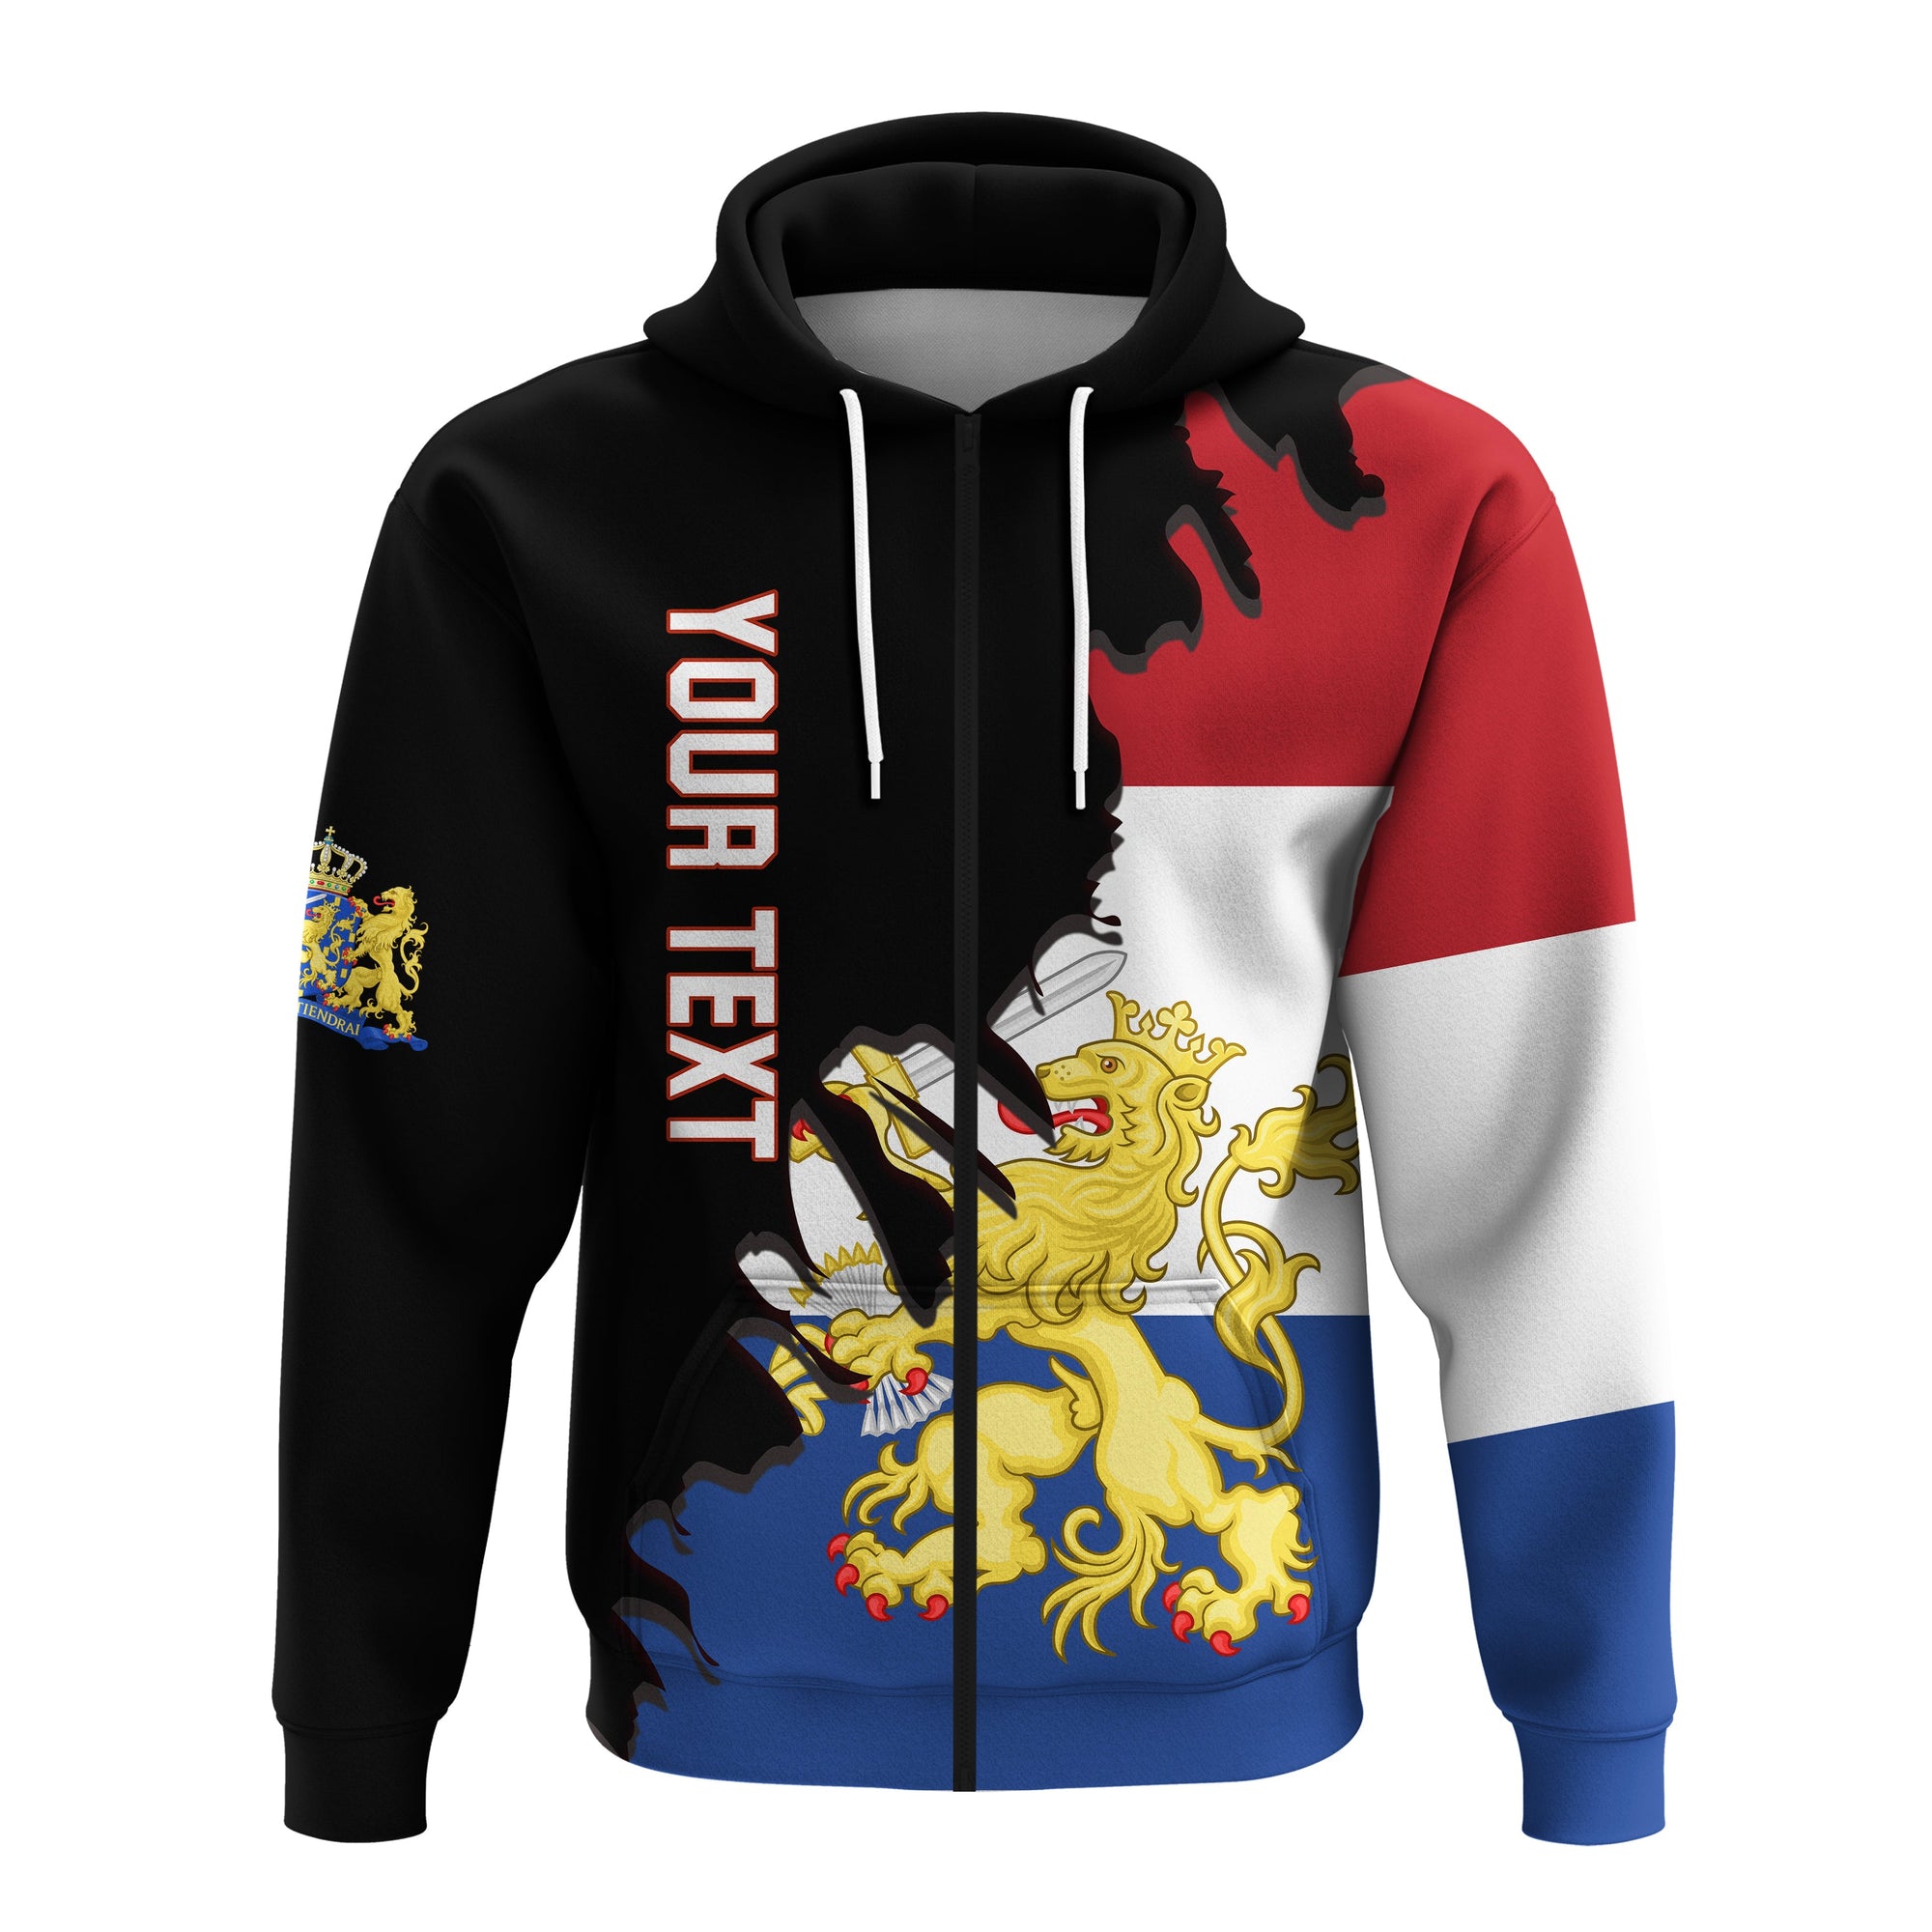 custom-personalised-netherlands-zip-hoodie-style-flag-and-map-holland